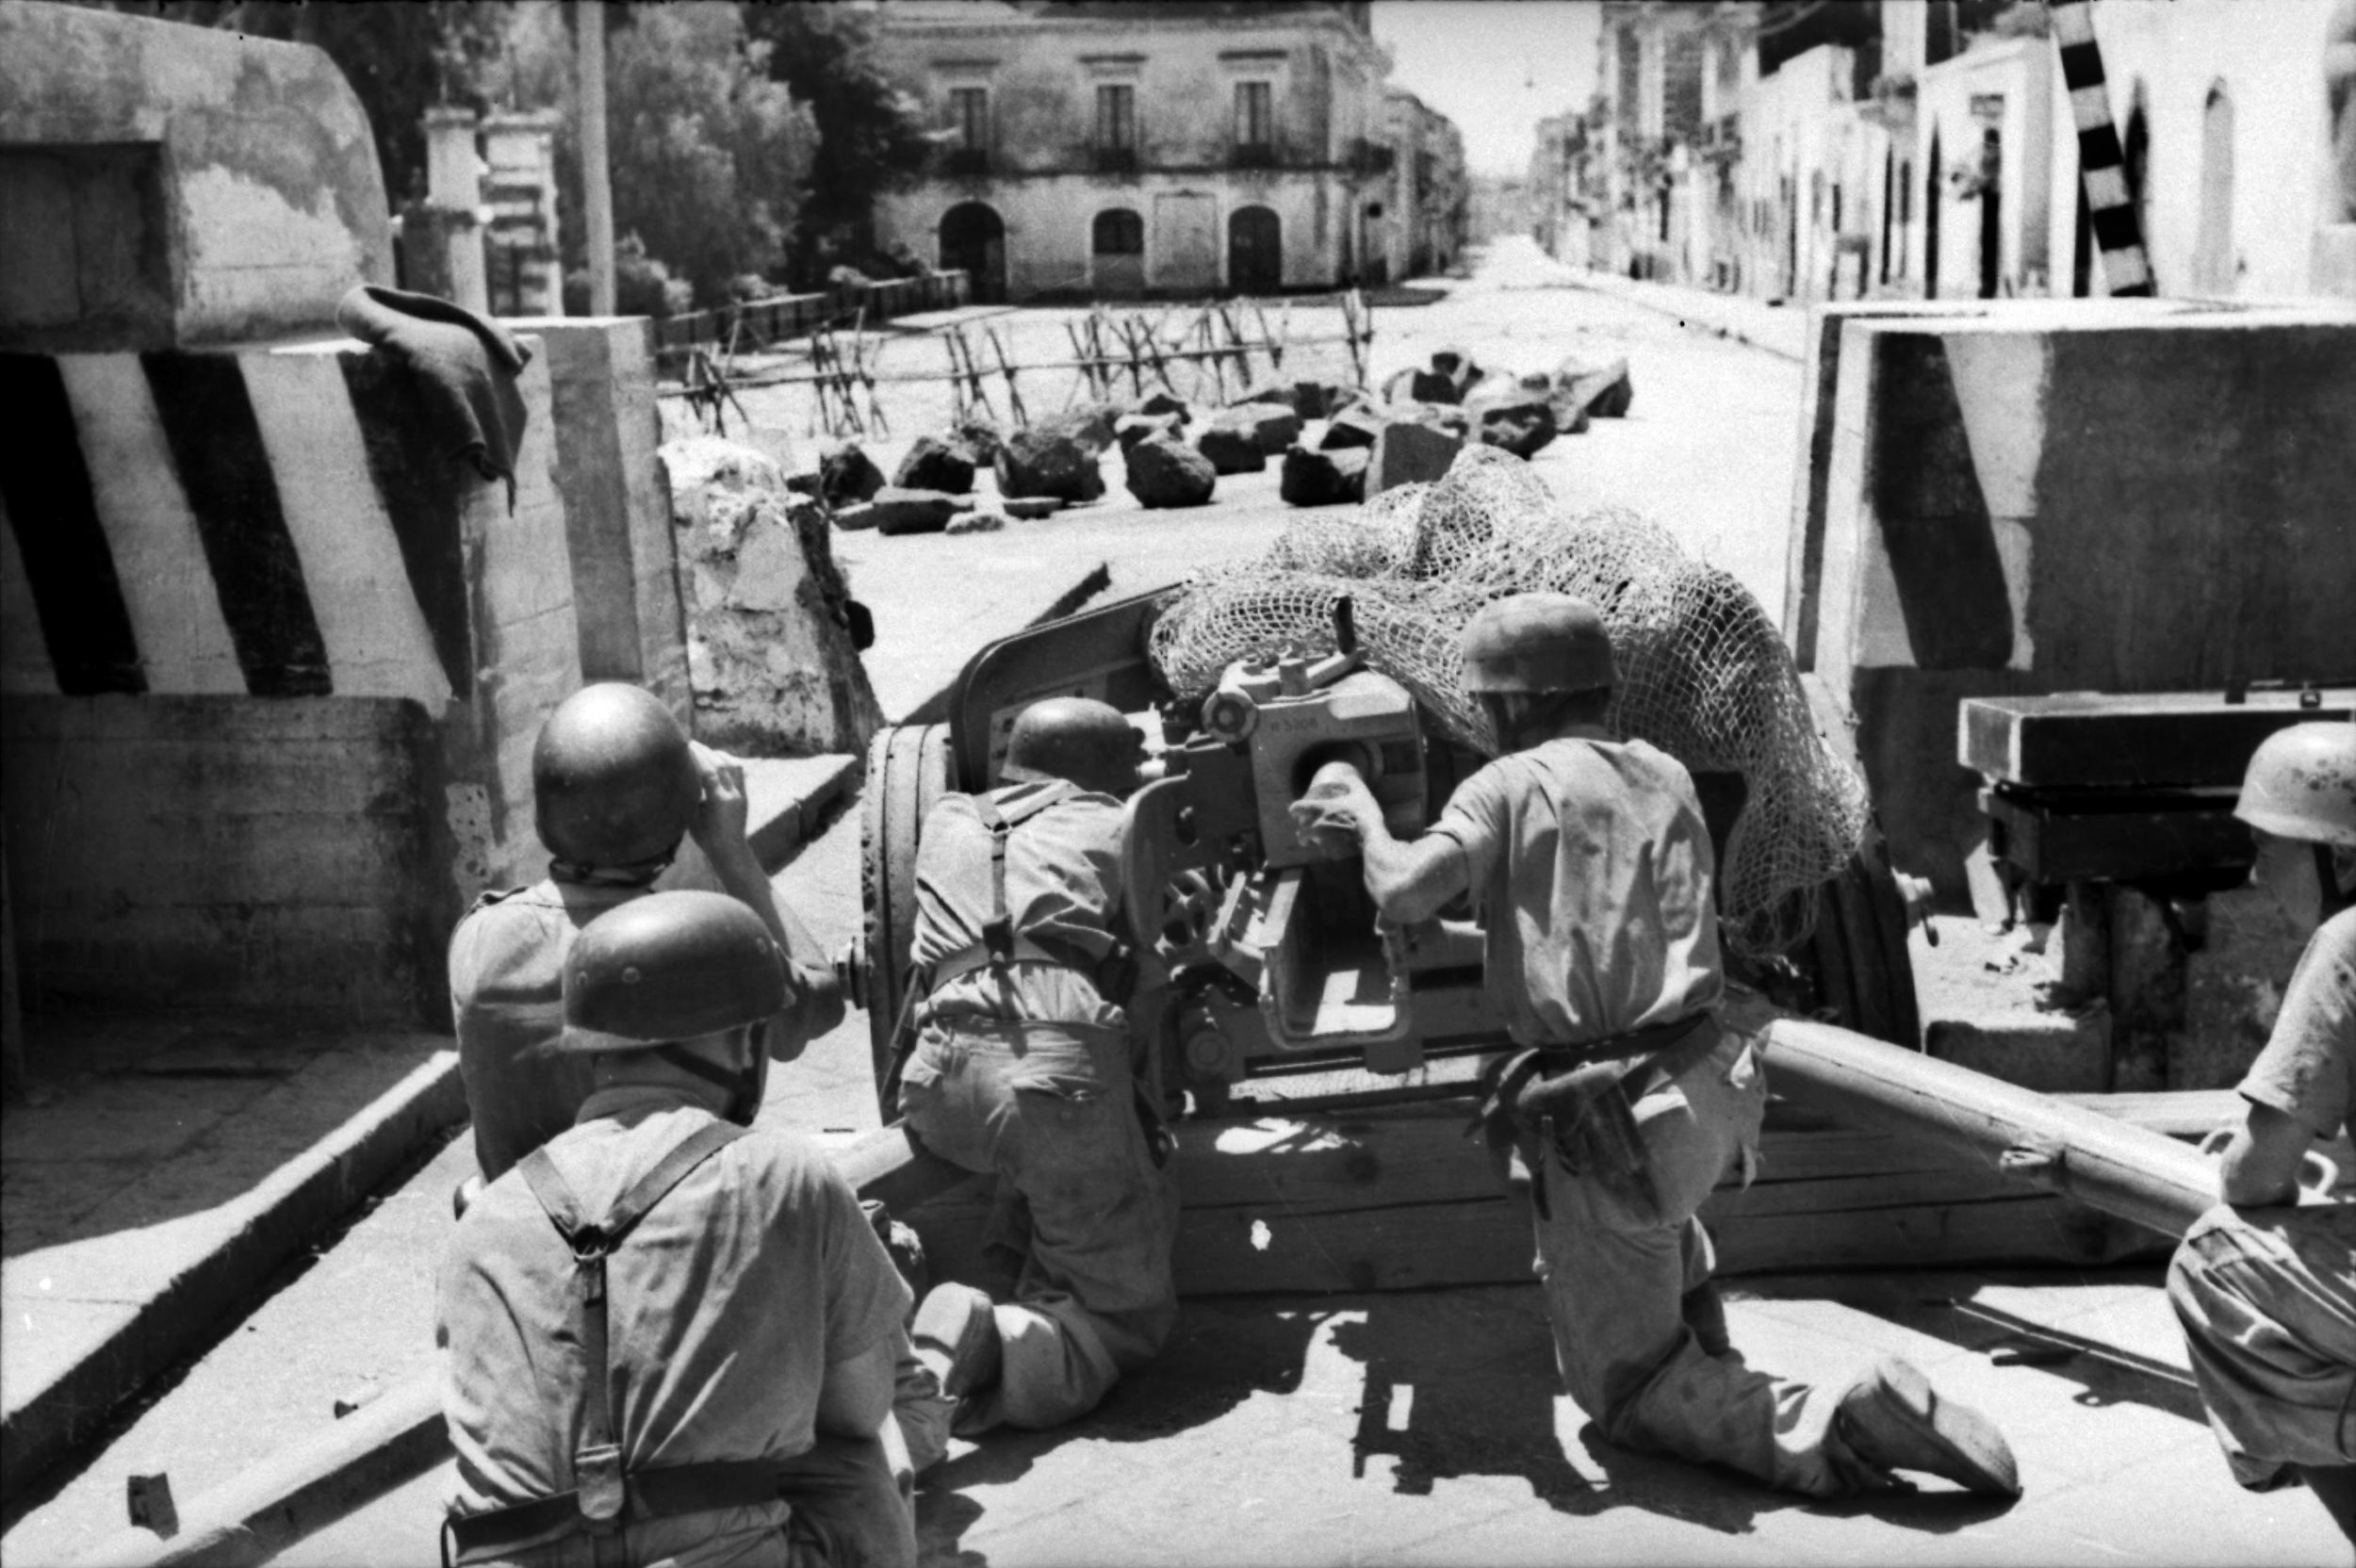 Preparing to stop any Allied advance on the outskirts of Messina, Fallschirmjägers of the 1st Parachute Division set up a 7.5cm PAK 40 anti-tank gun at a road block.